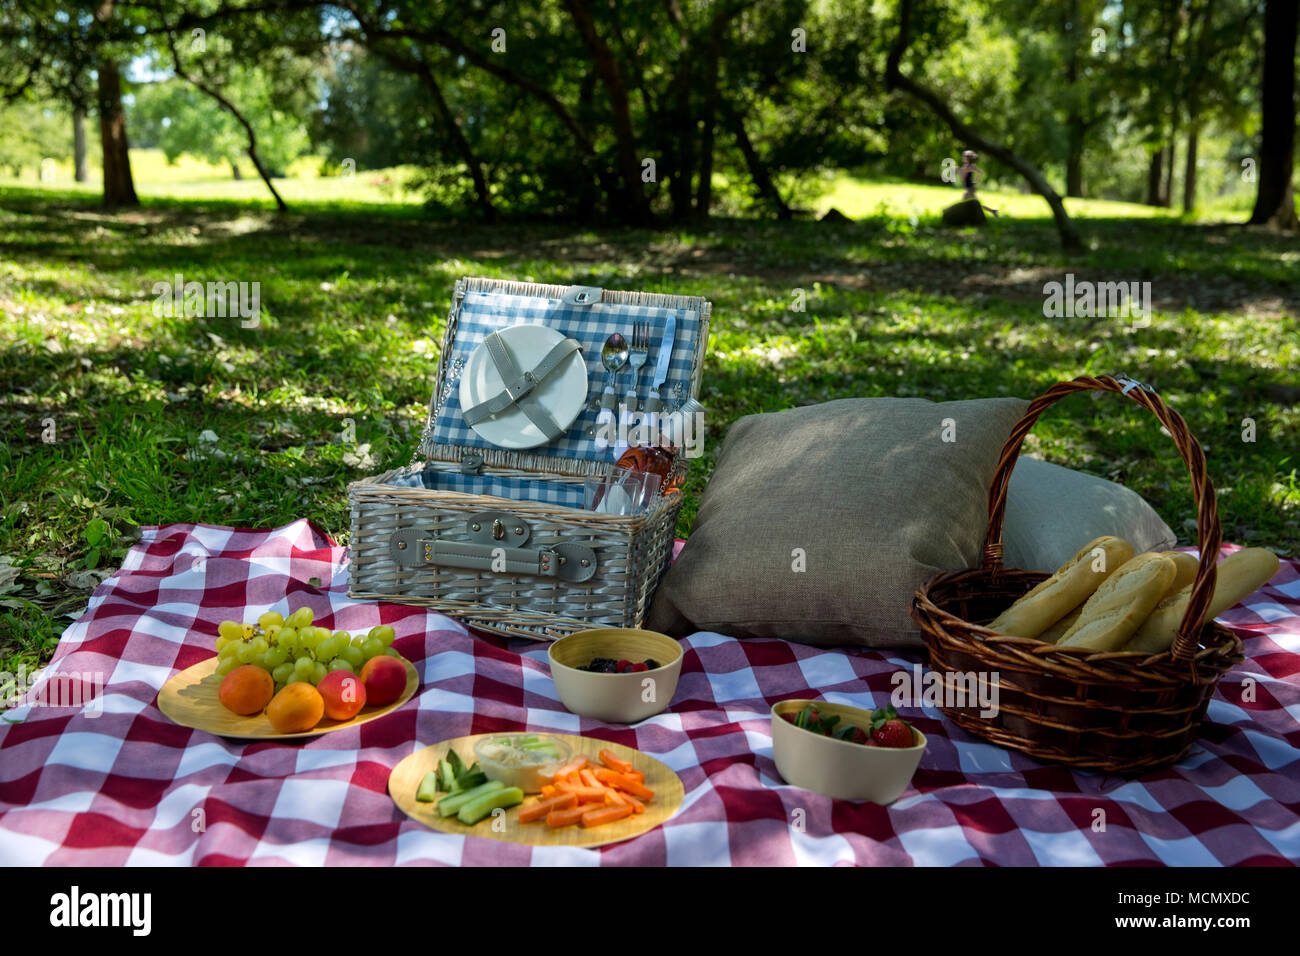 Picnic in a park Stock Photo